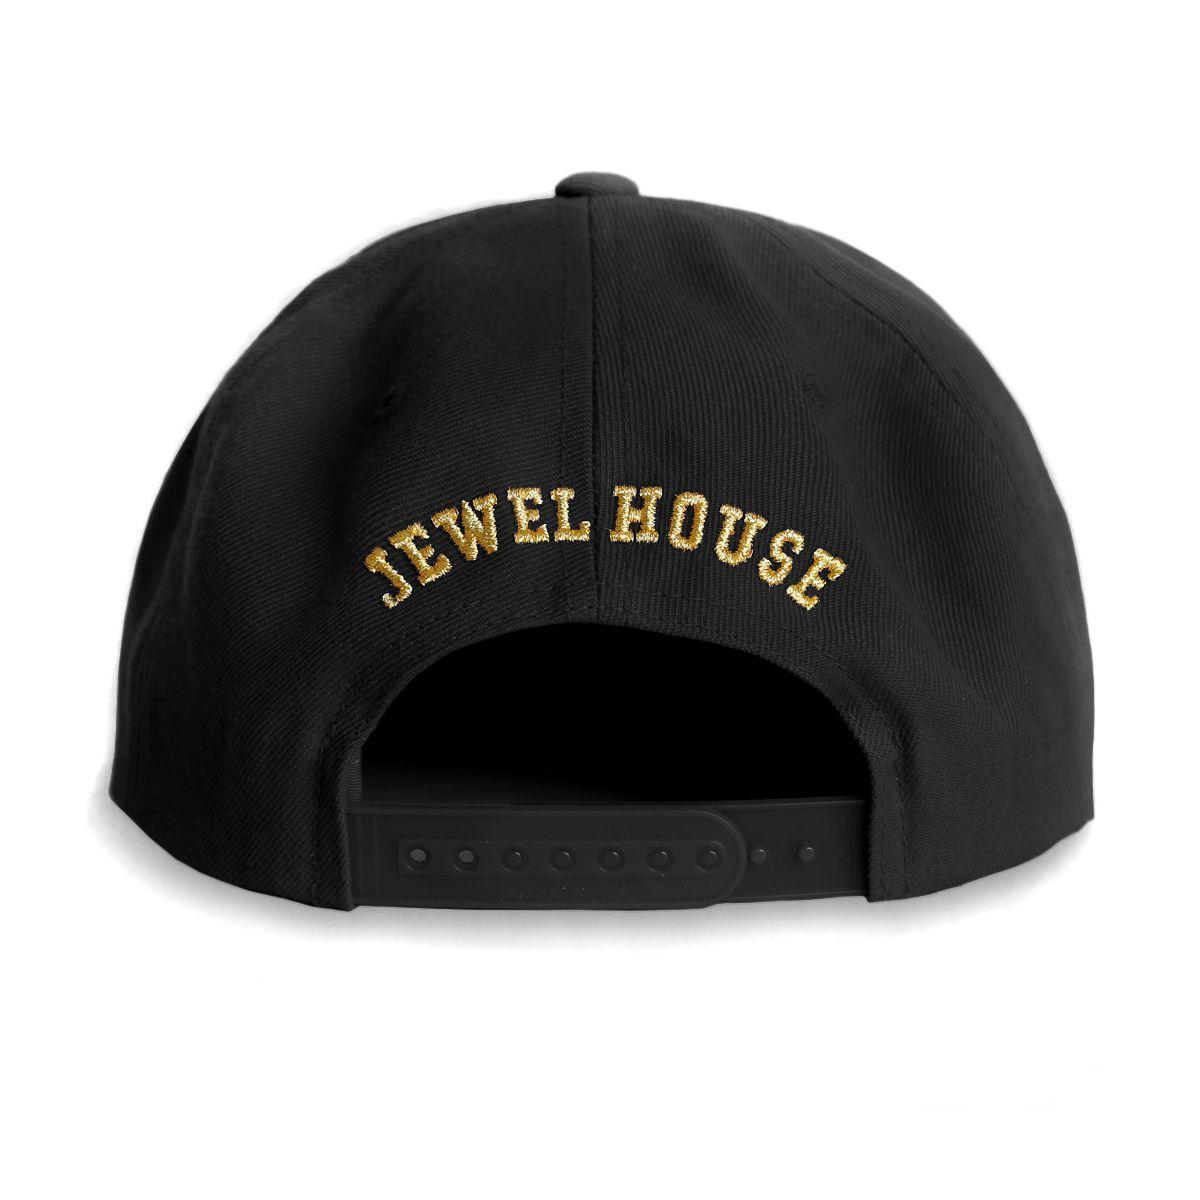 Jewel House Clothing Logo - Boosie Launches Jewel House Clothing Line | the Urban Coin